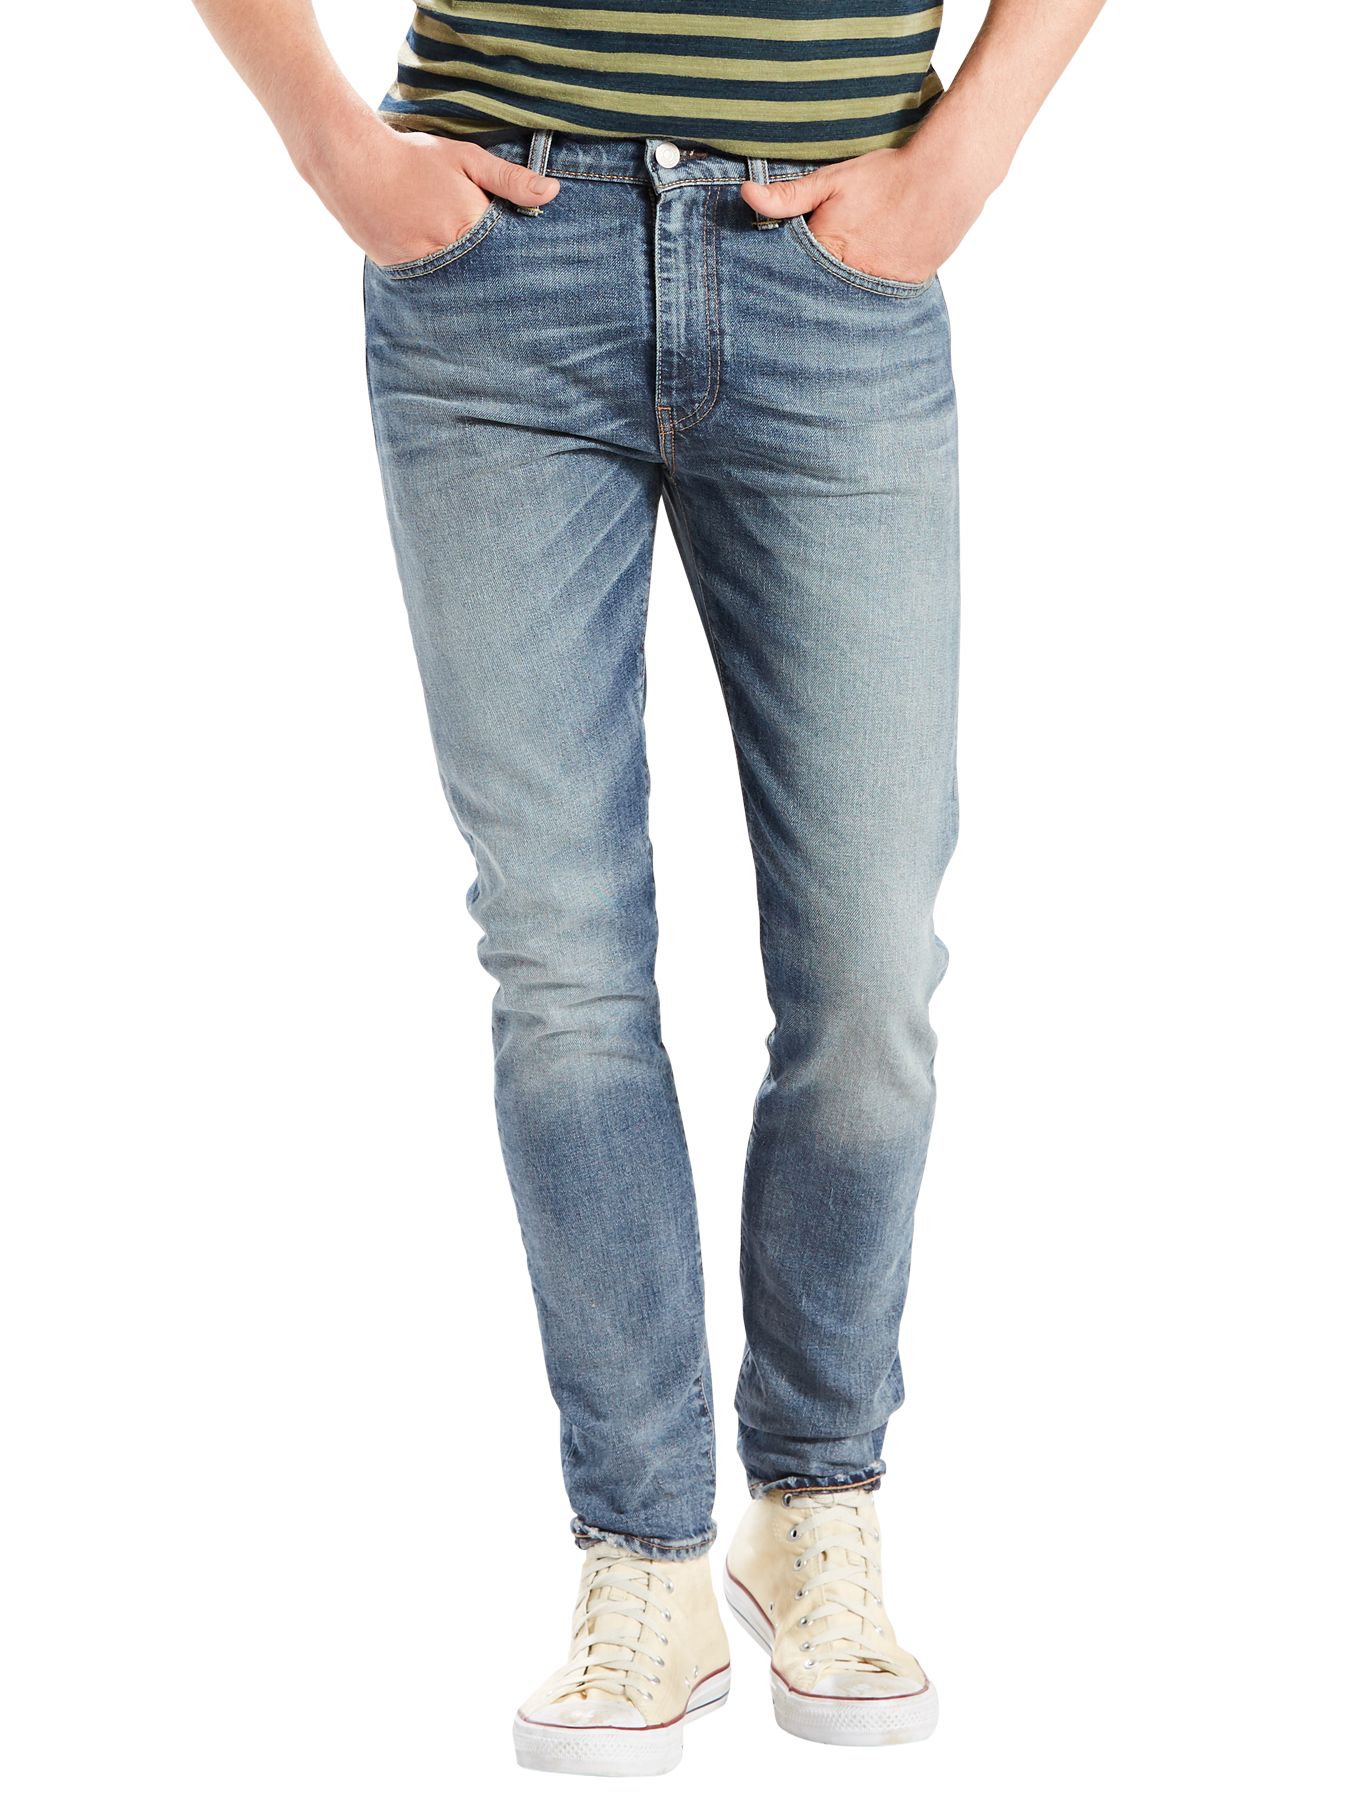 Levi's 512 Slim Tapered Jeans, Charley 